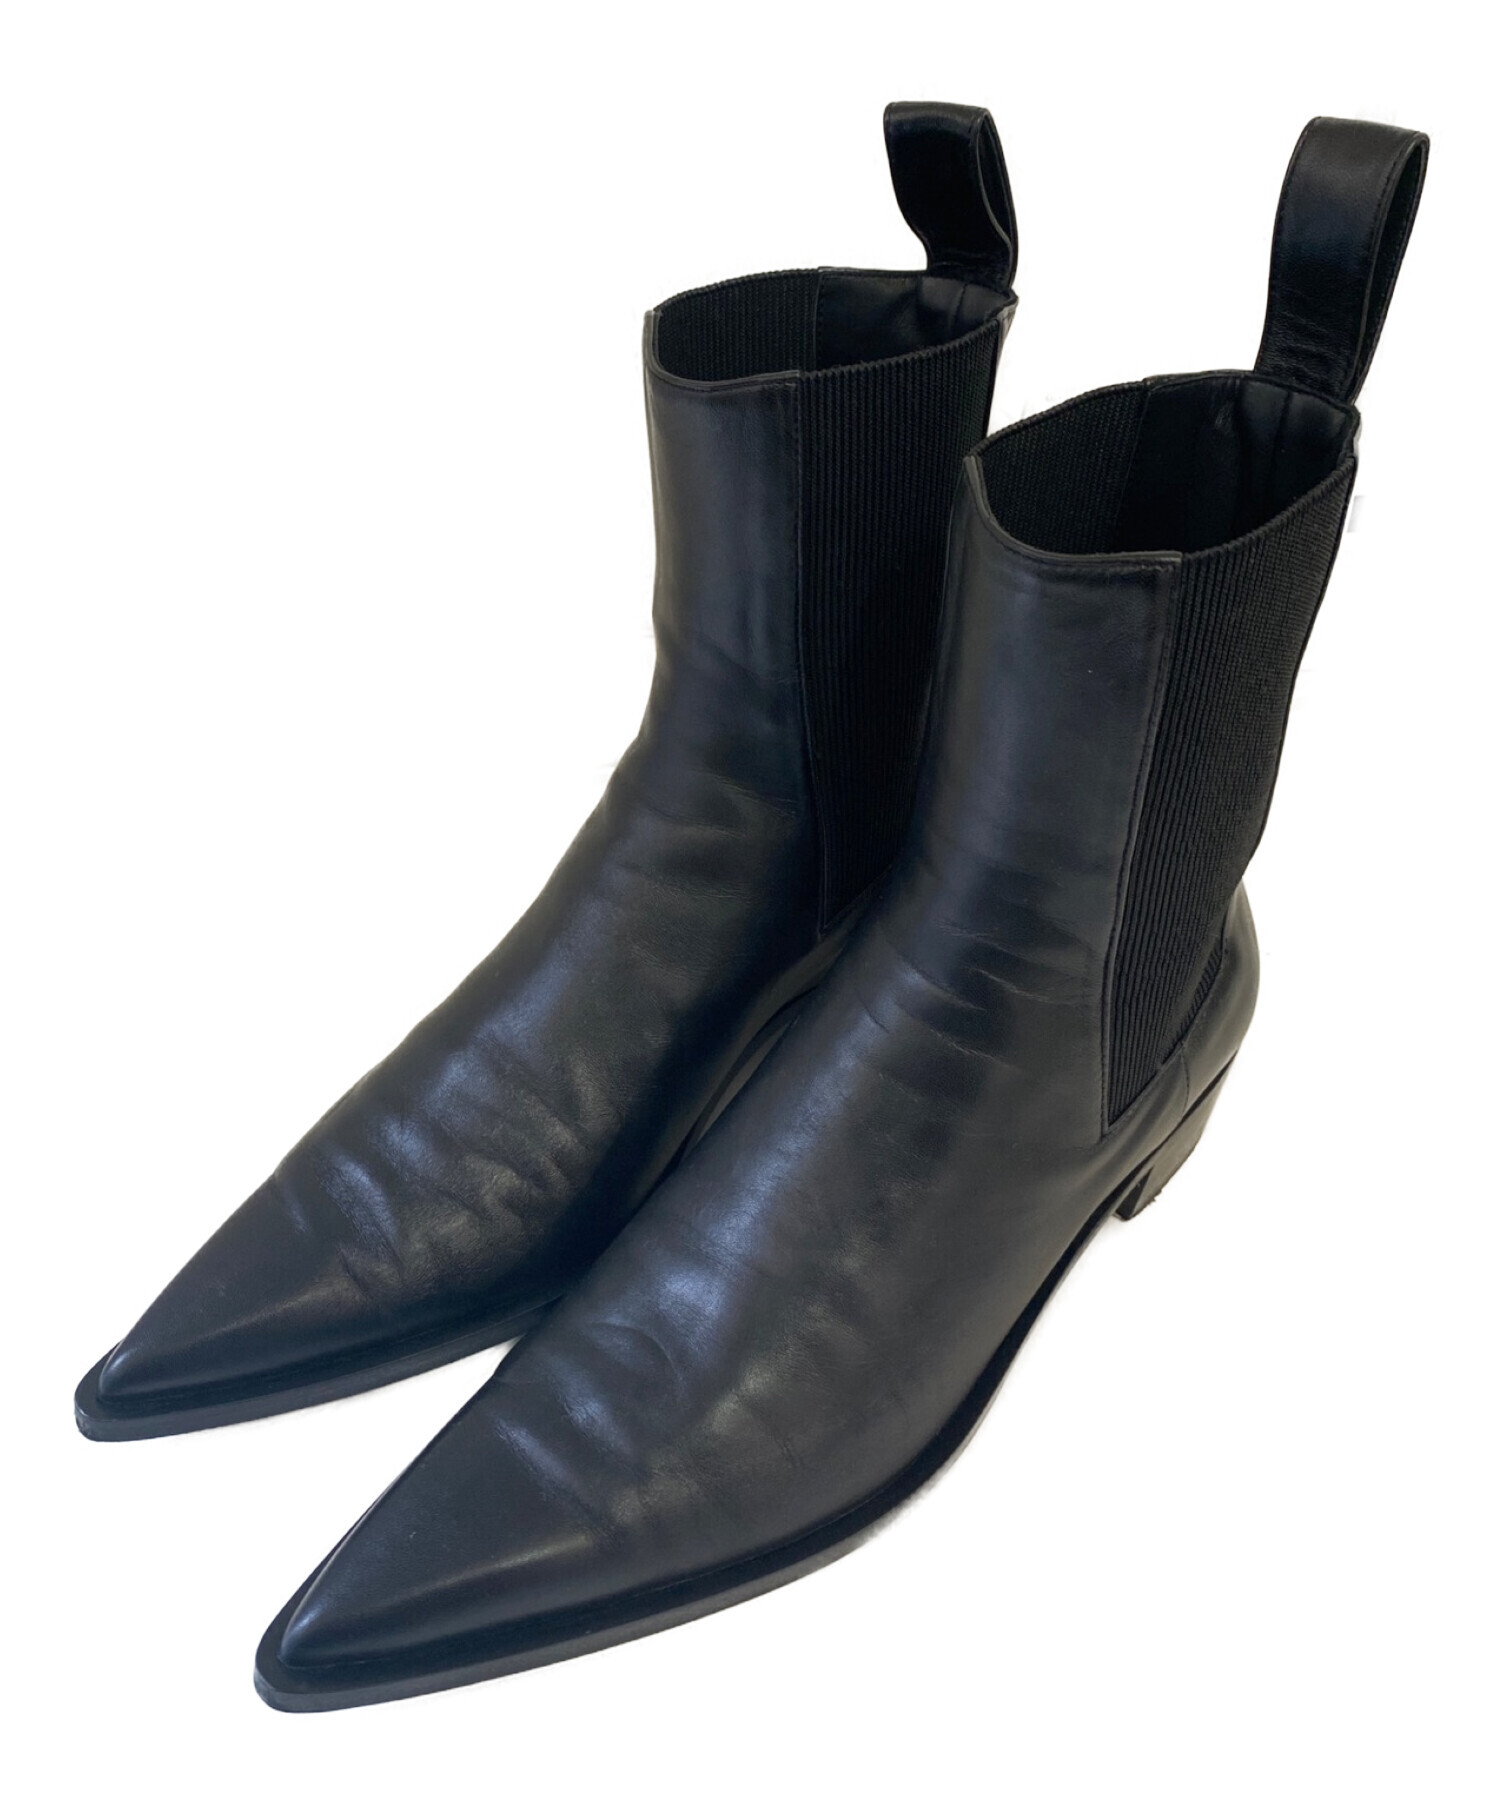 peter do everyday leather boots ヒールブーツ12万で即決します